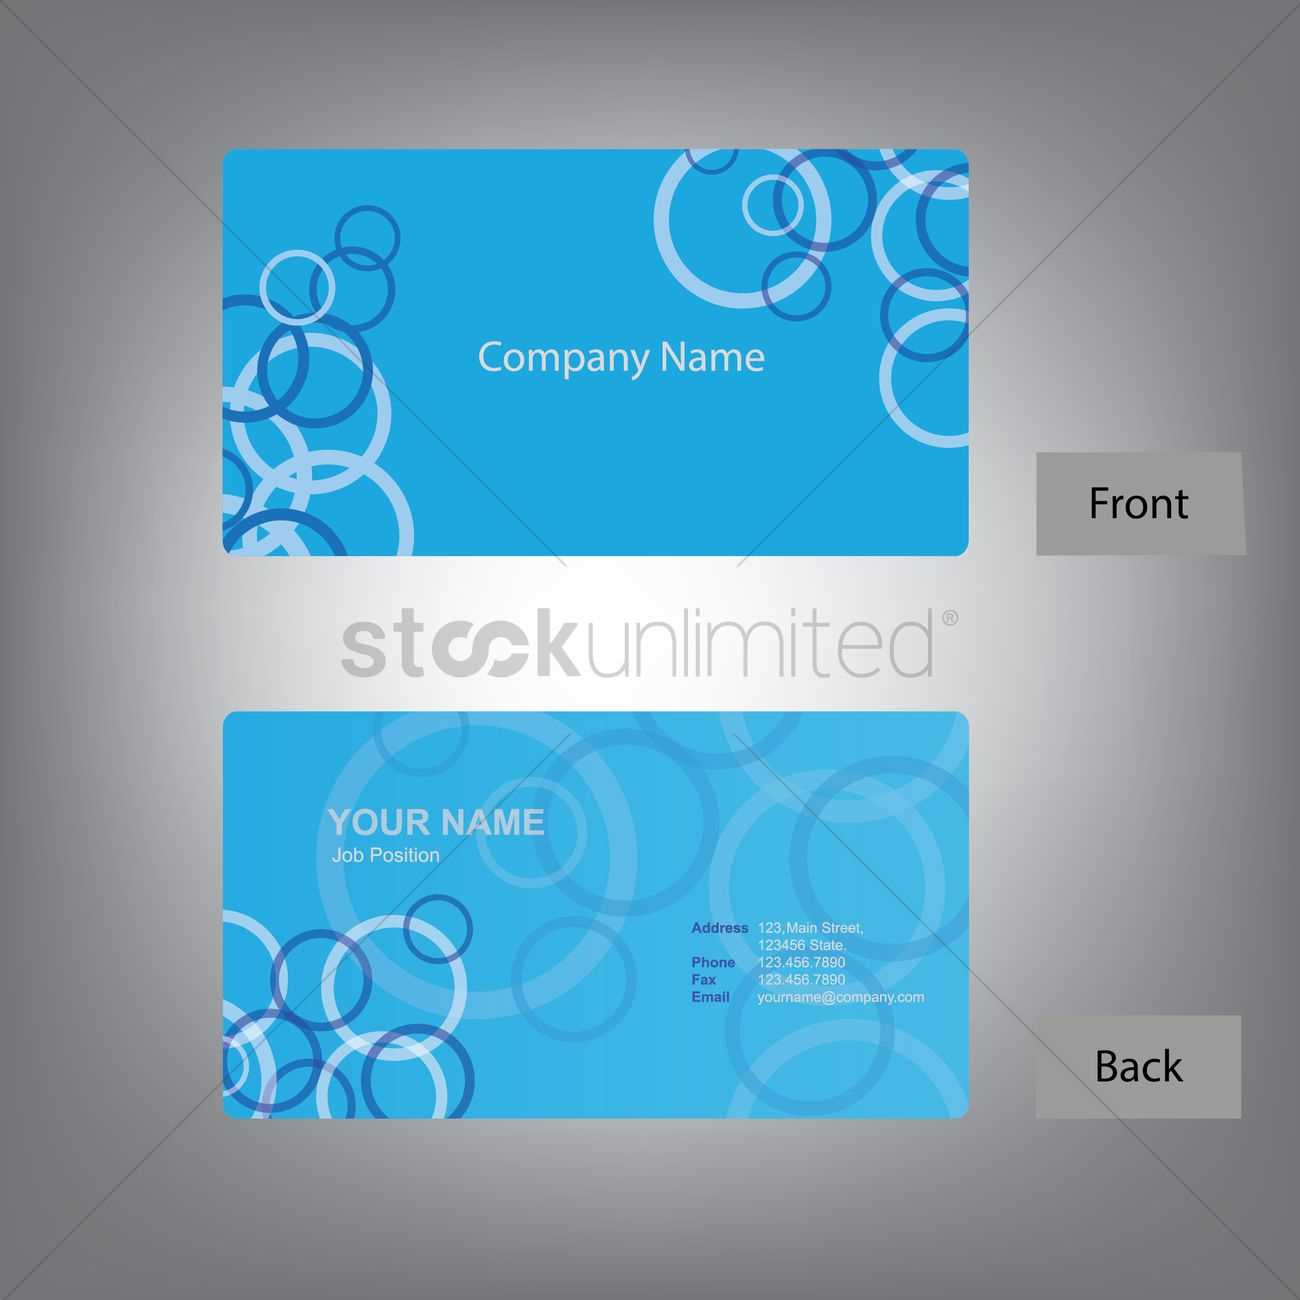 Business Card Front And Back Design Visiting Template Free With Front And Back Business Card Template Word